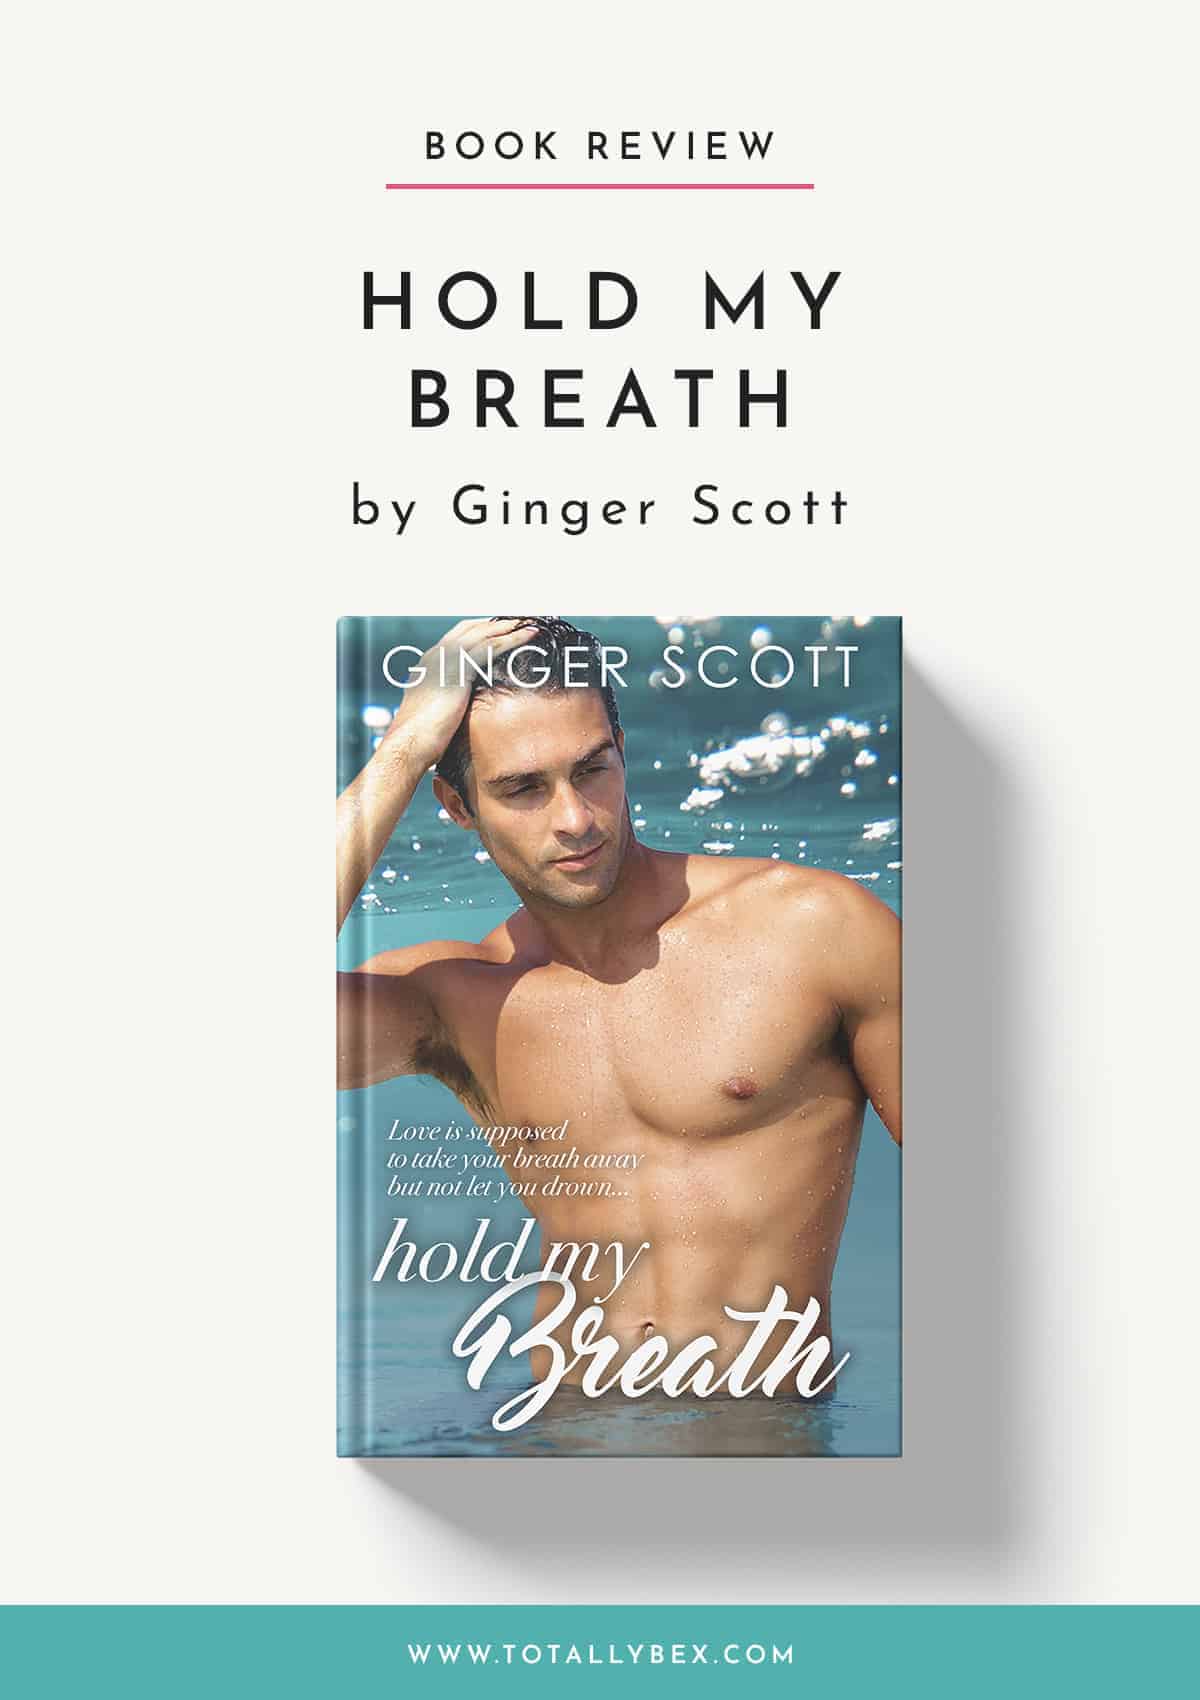 Hold My Breath by Ginger Scott-Book Review